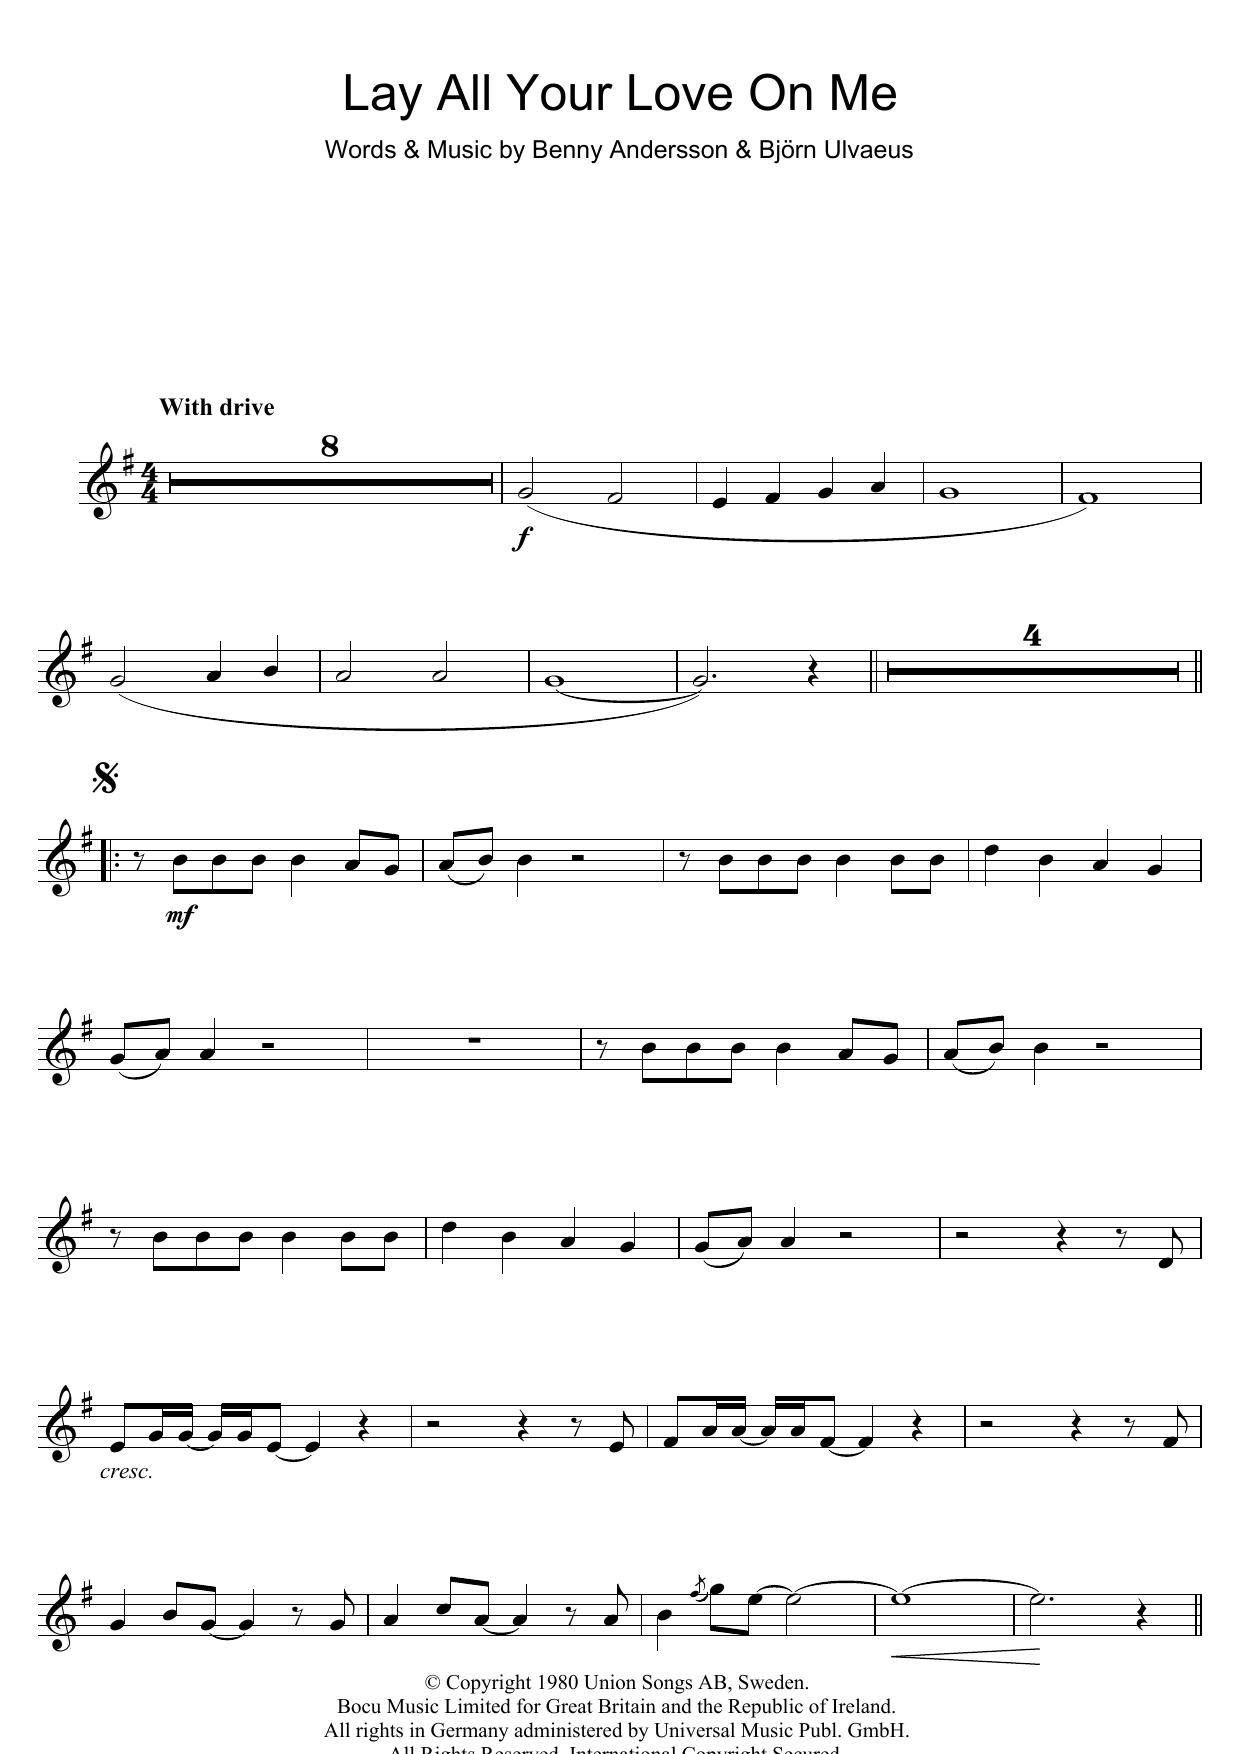 Download ABBA Lay All Your Love On Me Sheet Music